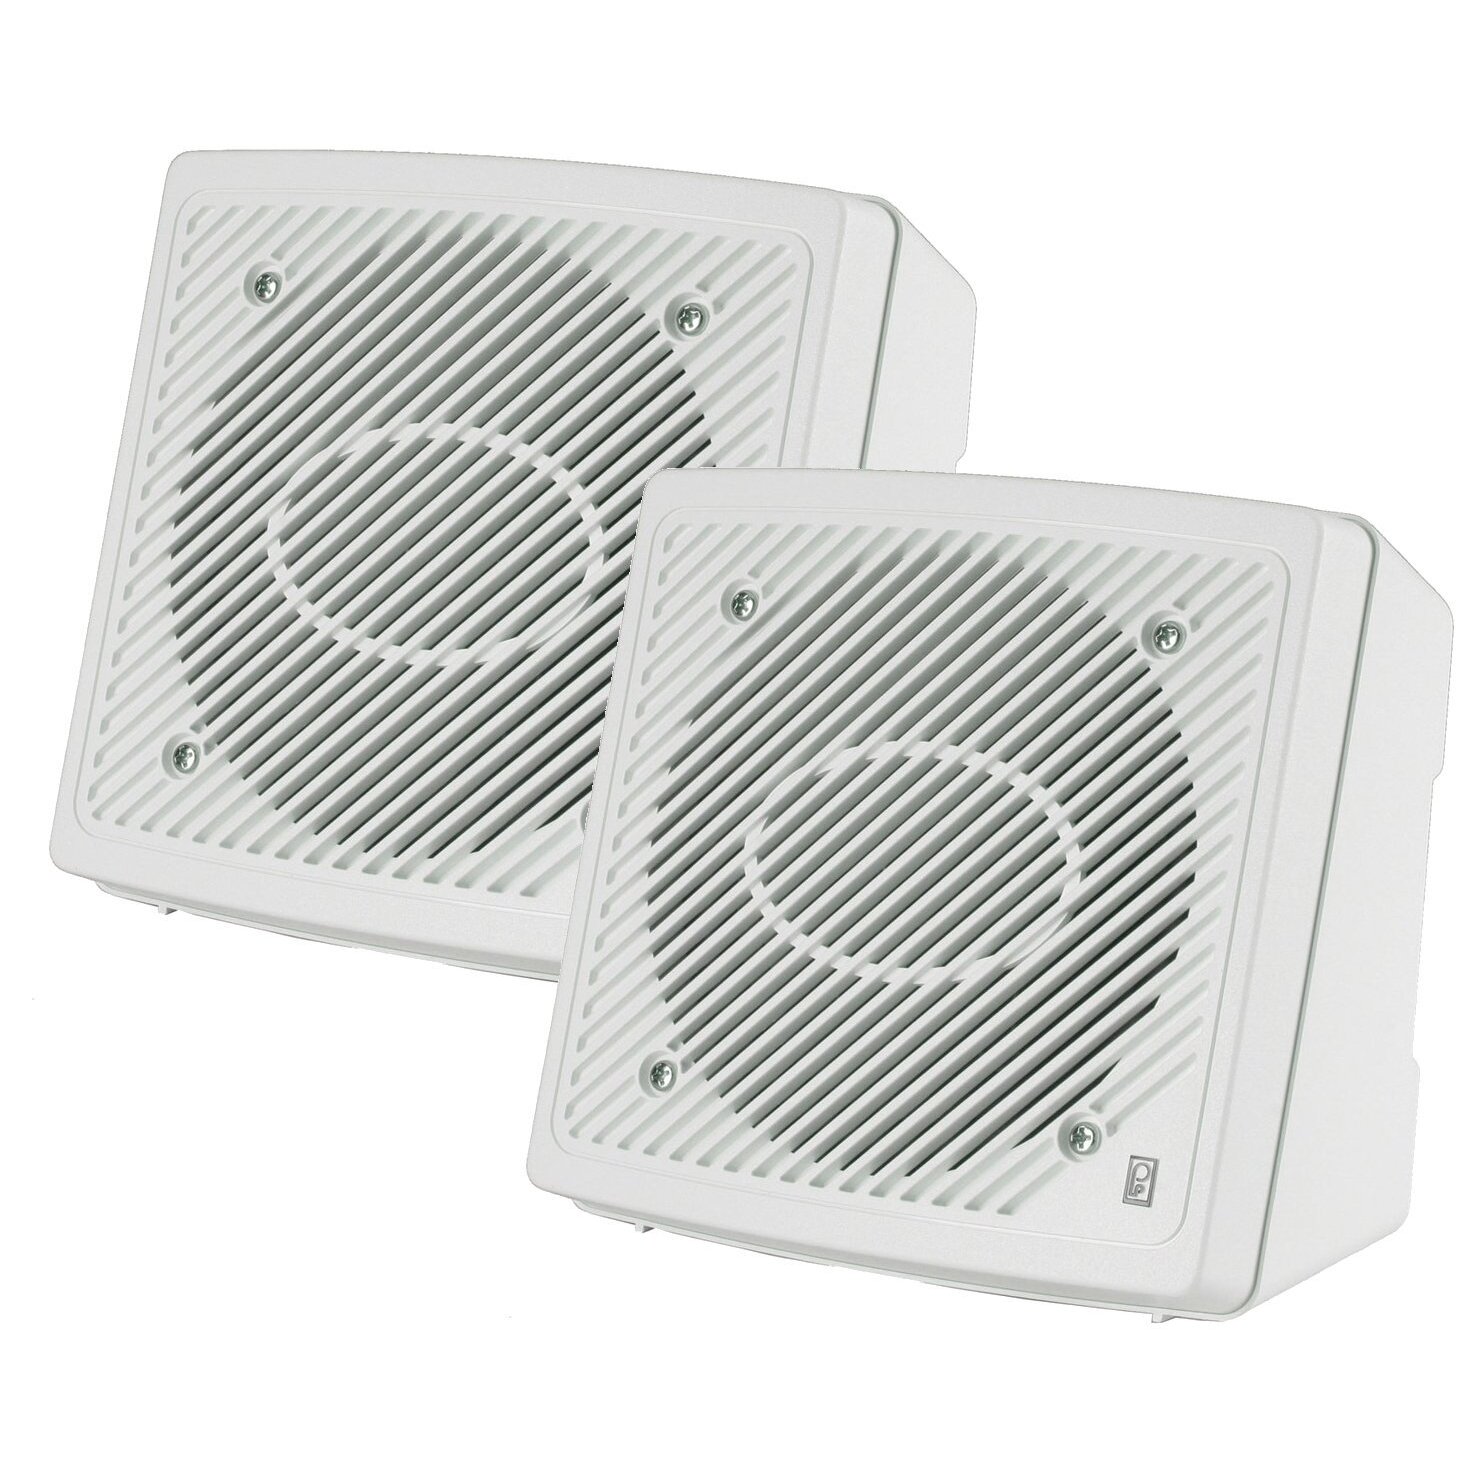 Poly-Planar MA1610 5.25" Enclosed/Flush Mount Coaxial (pair) Waterproof Marine Speakers